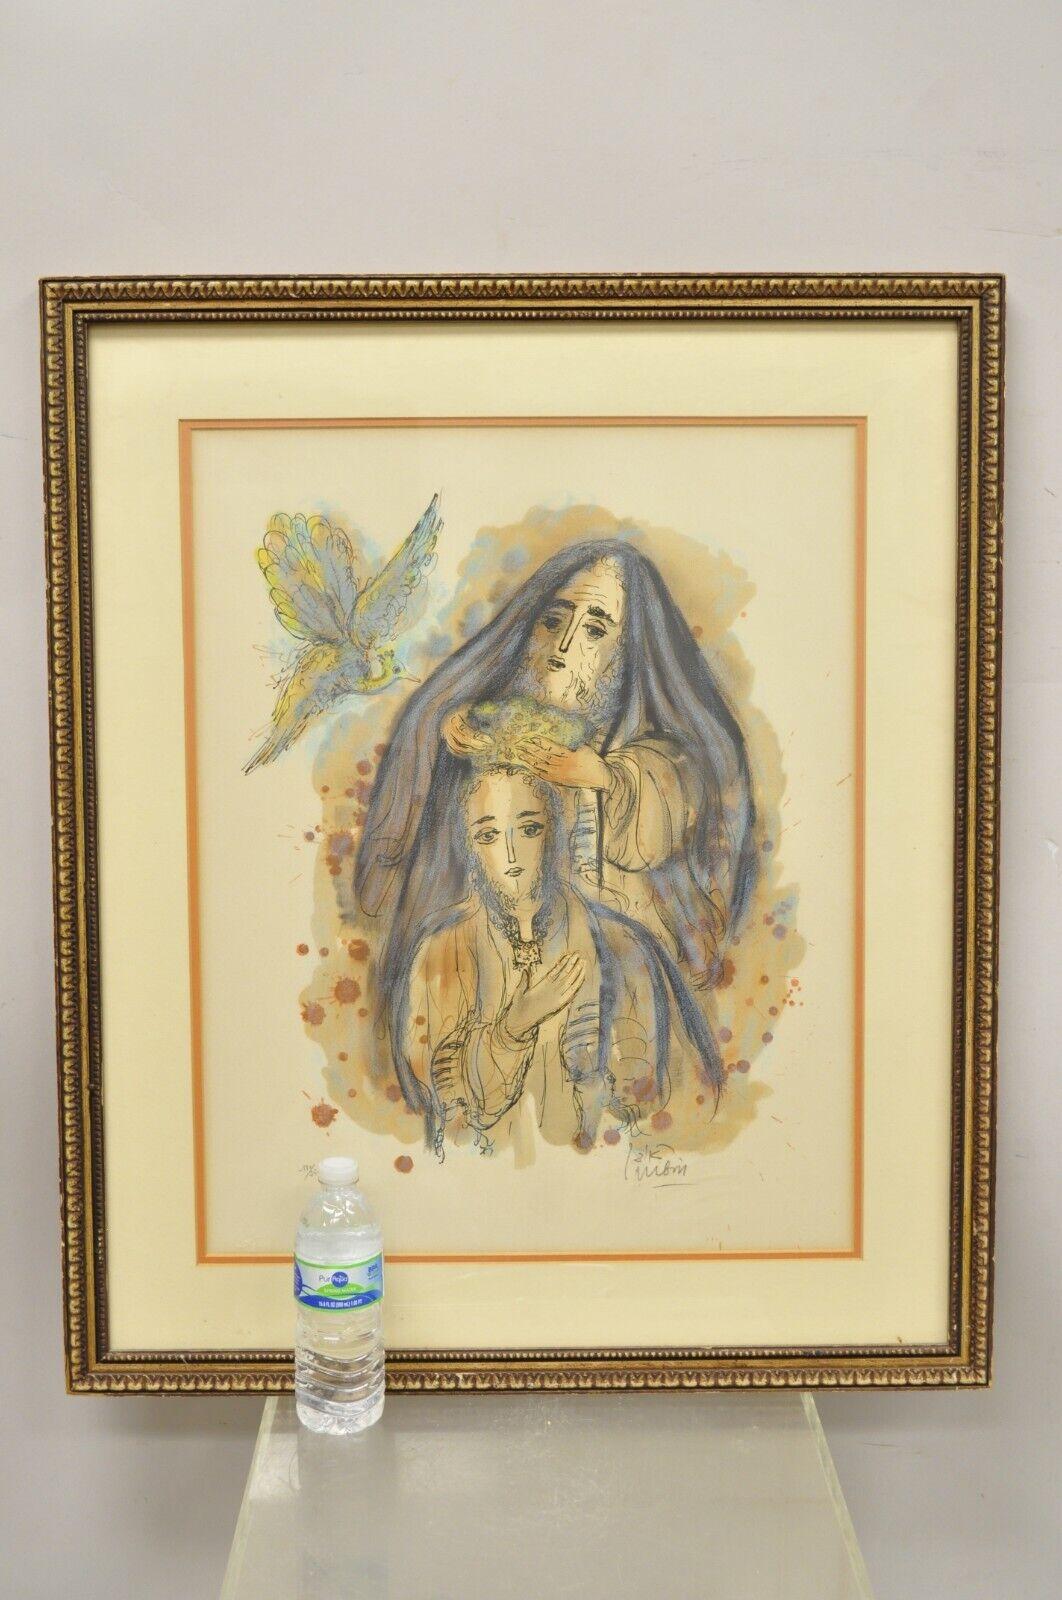 Reuven Rubin framed story of David 1971 signed and numbered lithograph print (A). Item featured is pencil signed and numbered, original vintage artwork, artist Reuven Rubin (1893-1974), part of lithograph collection 